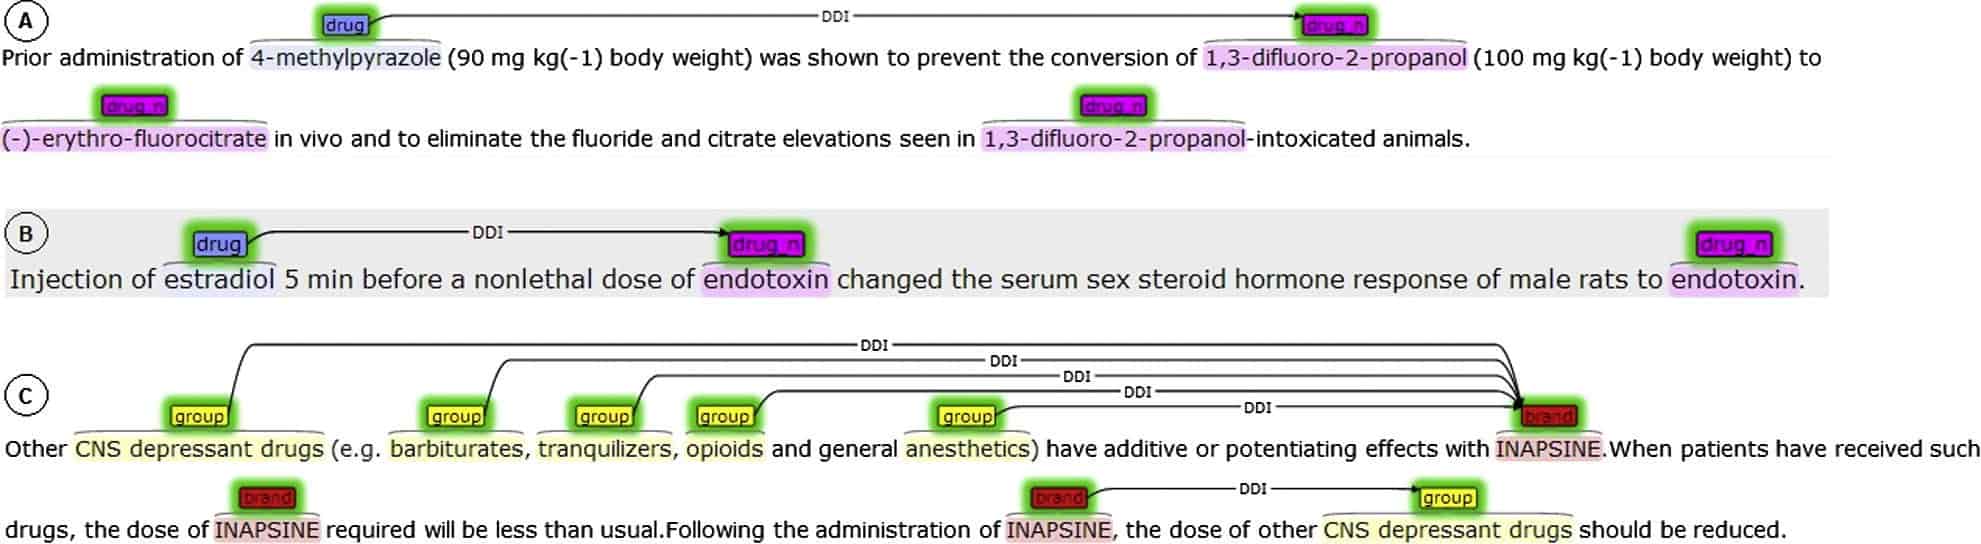 A classic use of AI in pharma: Some annotated texts in the DDI corpus used in the DDIExtraction Challenge, showing tagged drug-drug interactions which can be used to train [machine learning](/machine-learning-consulting) [algorithms](https://harmonydata.ac.uk/measuring-the-performance-of-nlp-algorithms). Image source: Segura-Bedmar et al (2014)